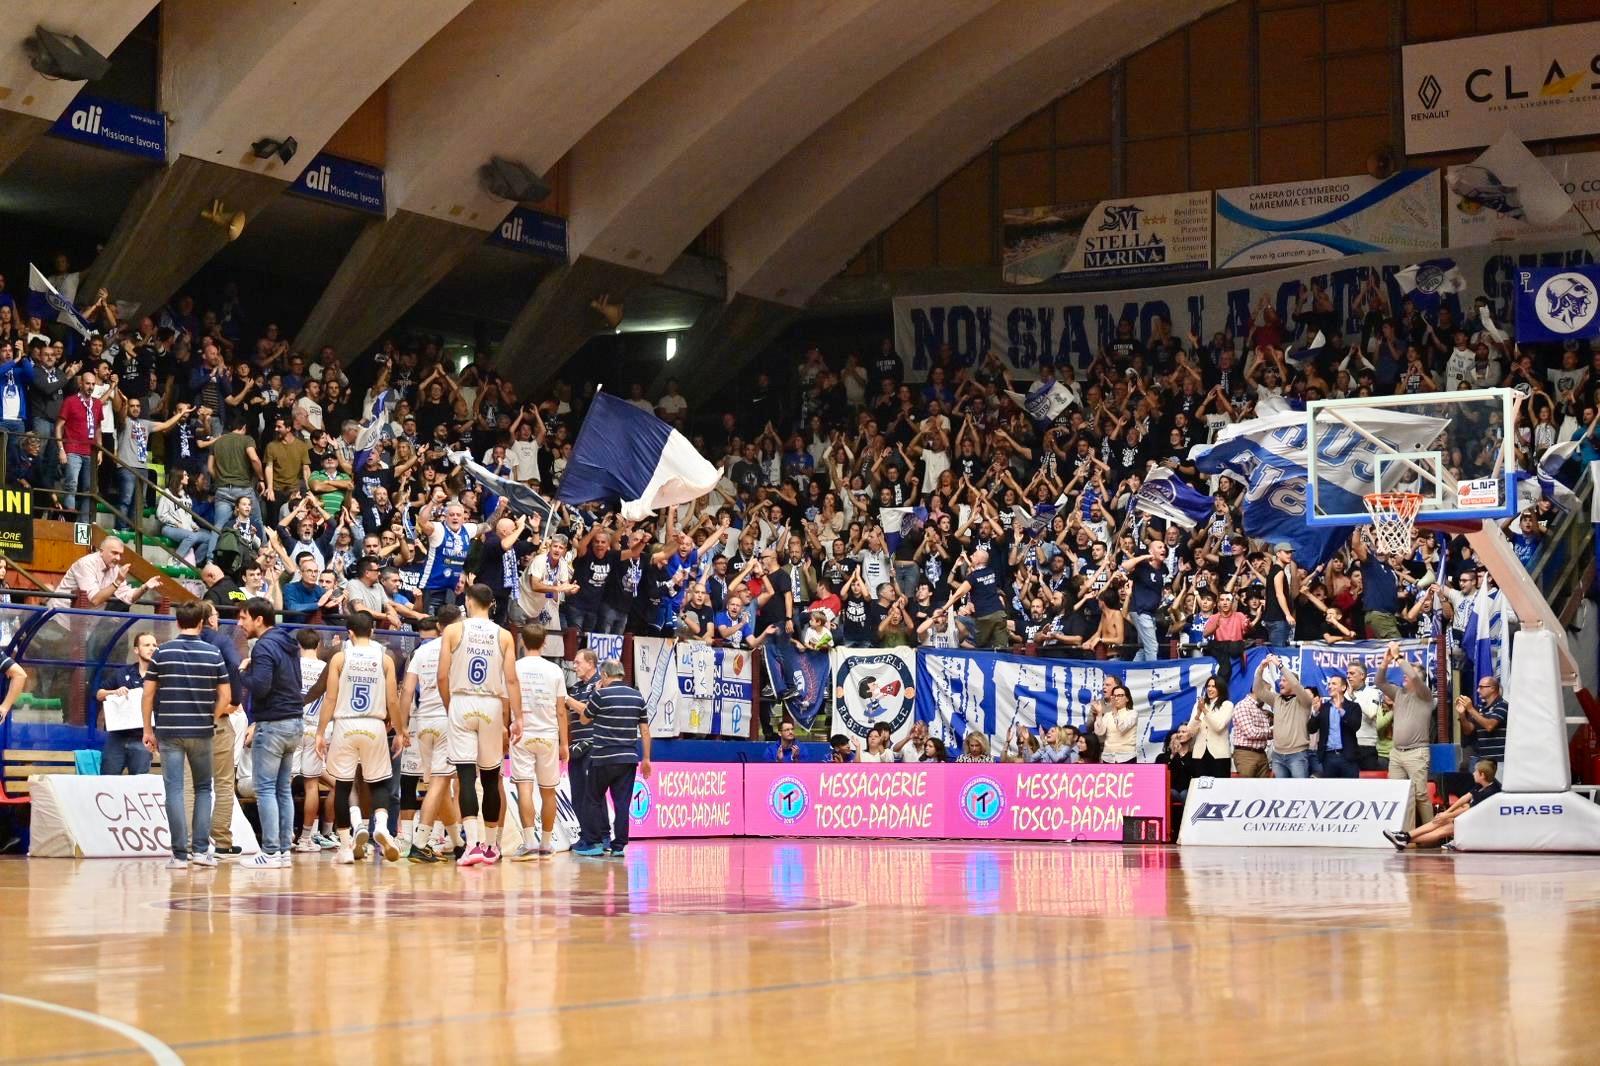 Pielle unstoppable, 86-73 victory over Desio